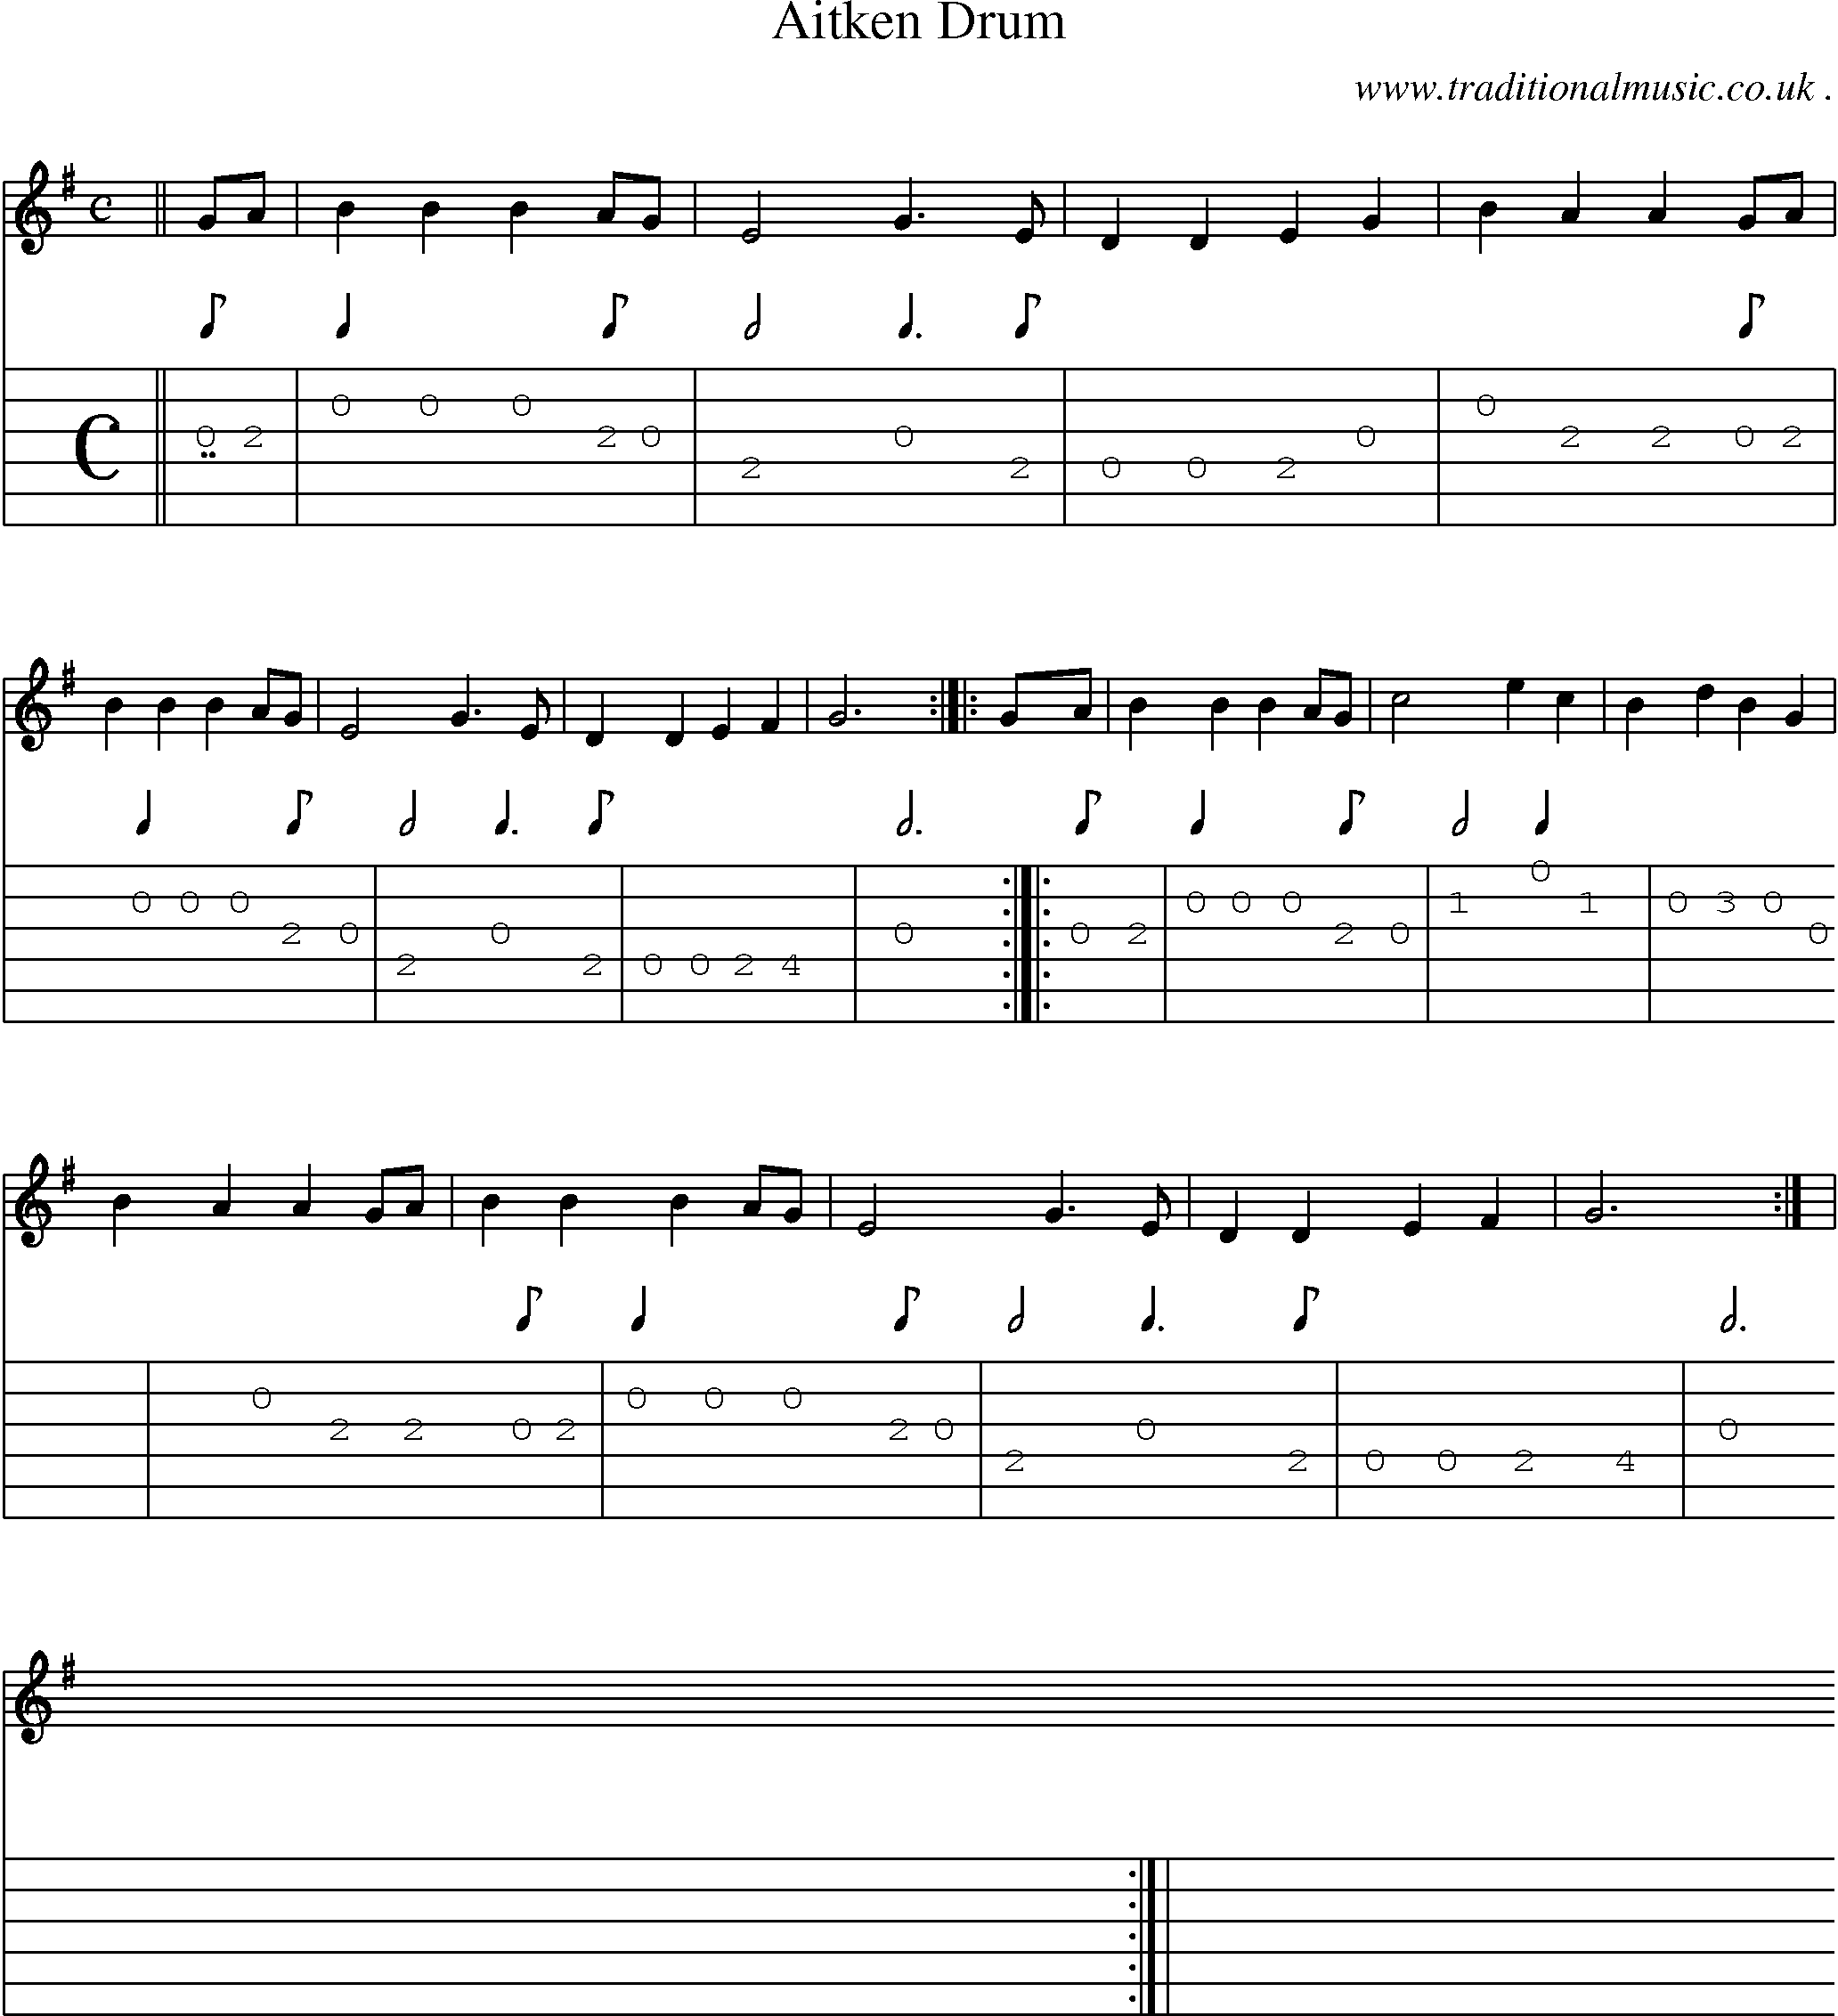 Sheet-music  score, Chords and Guitar Tabs for Aitken Drum